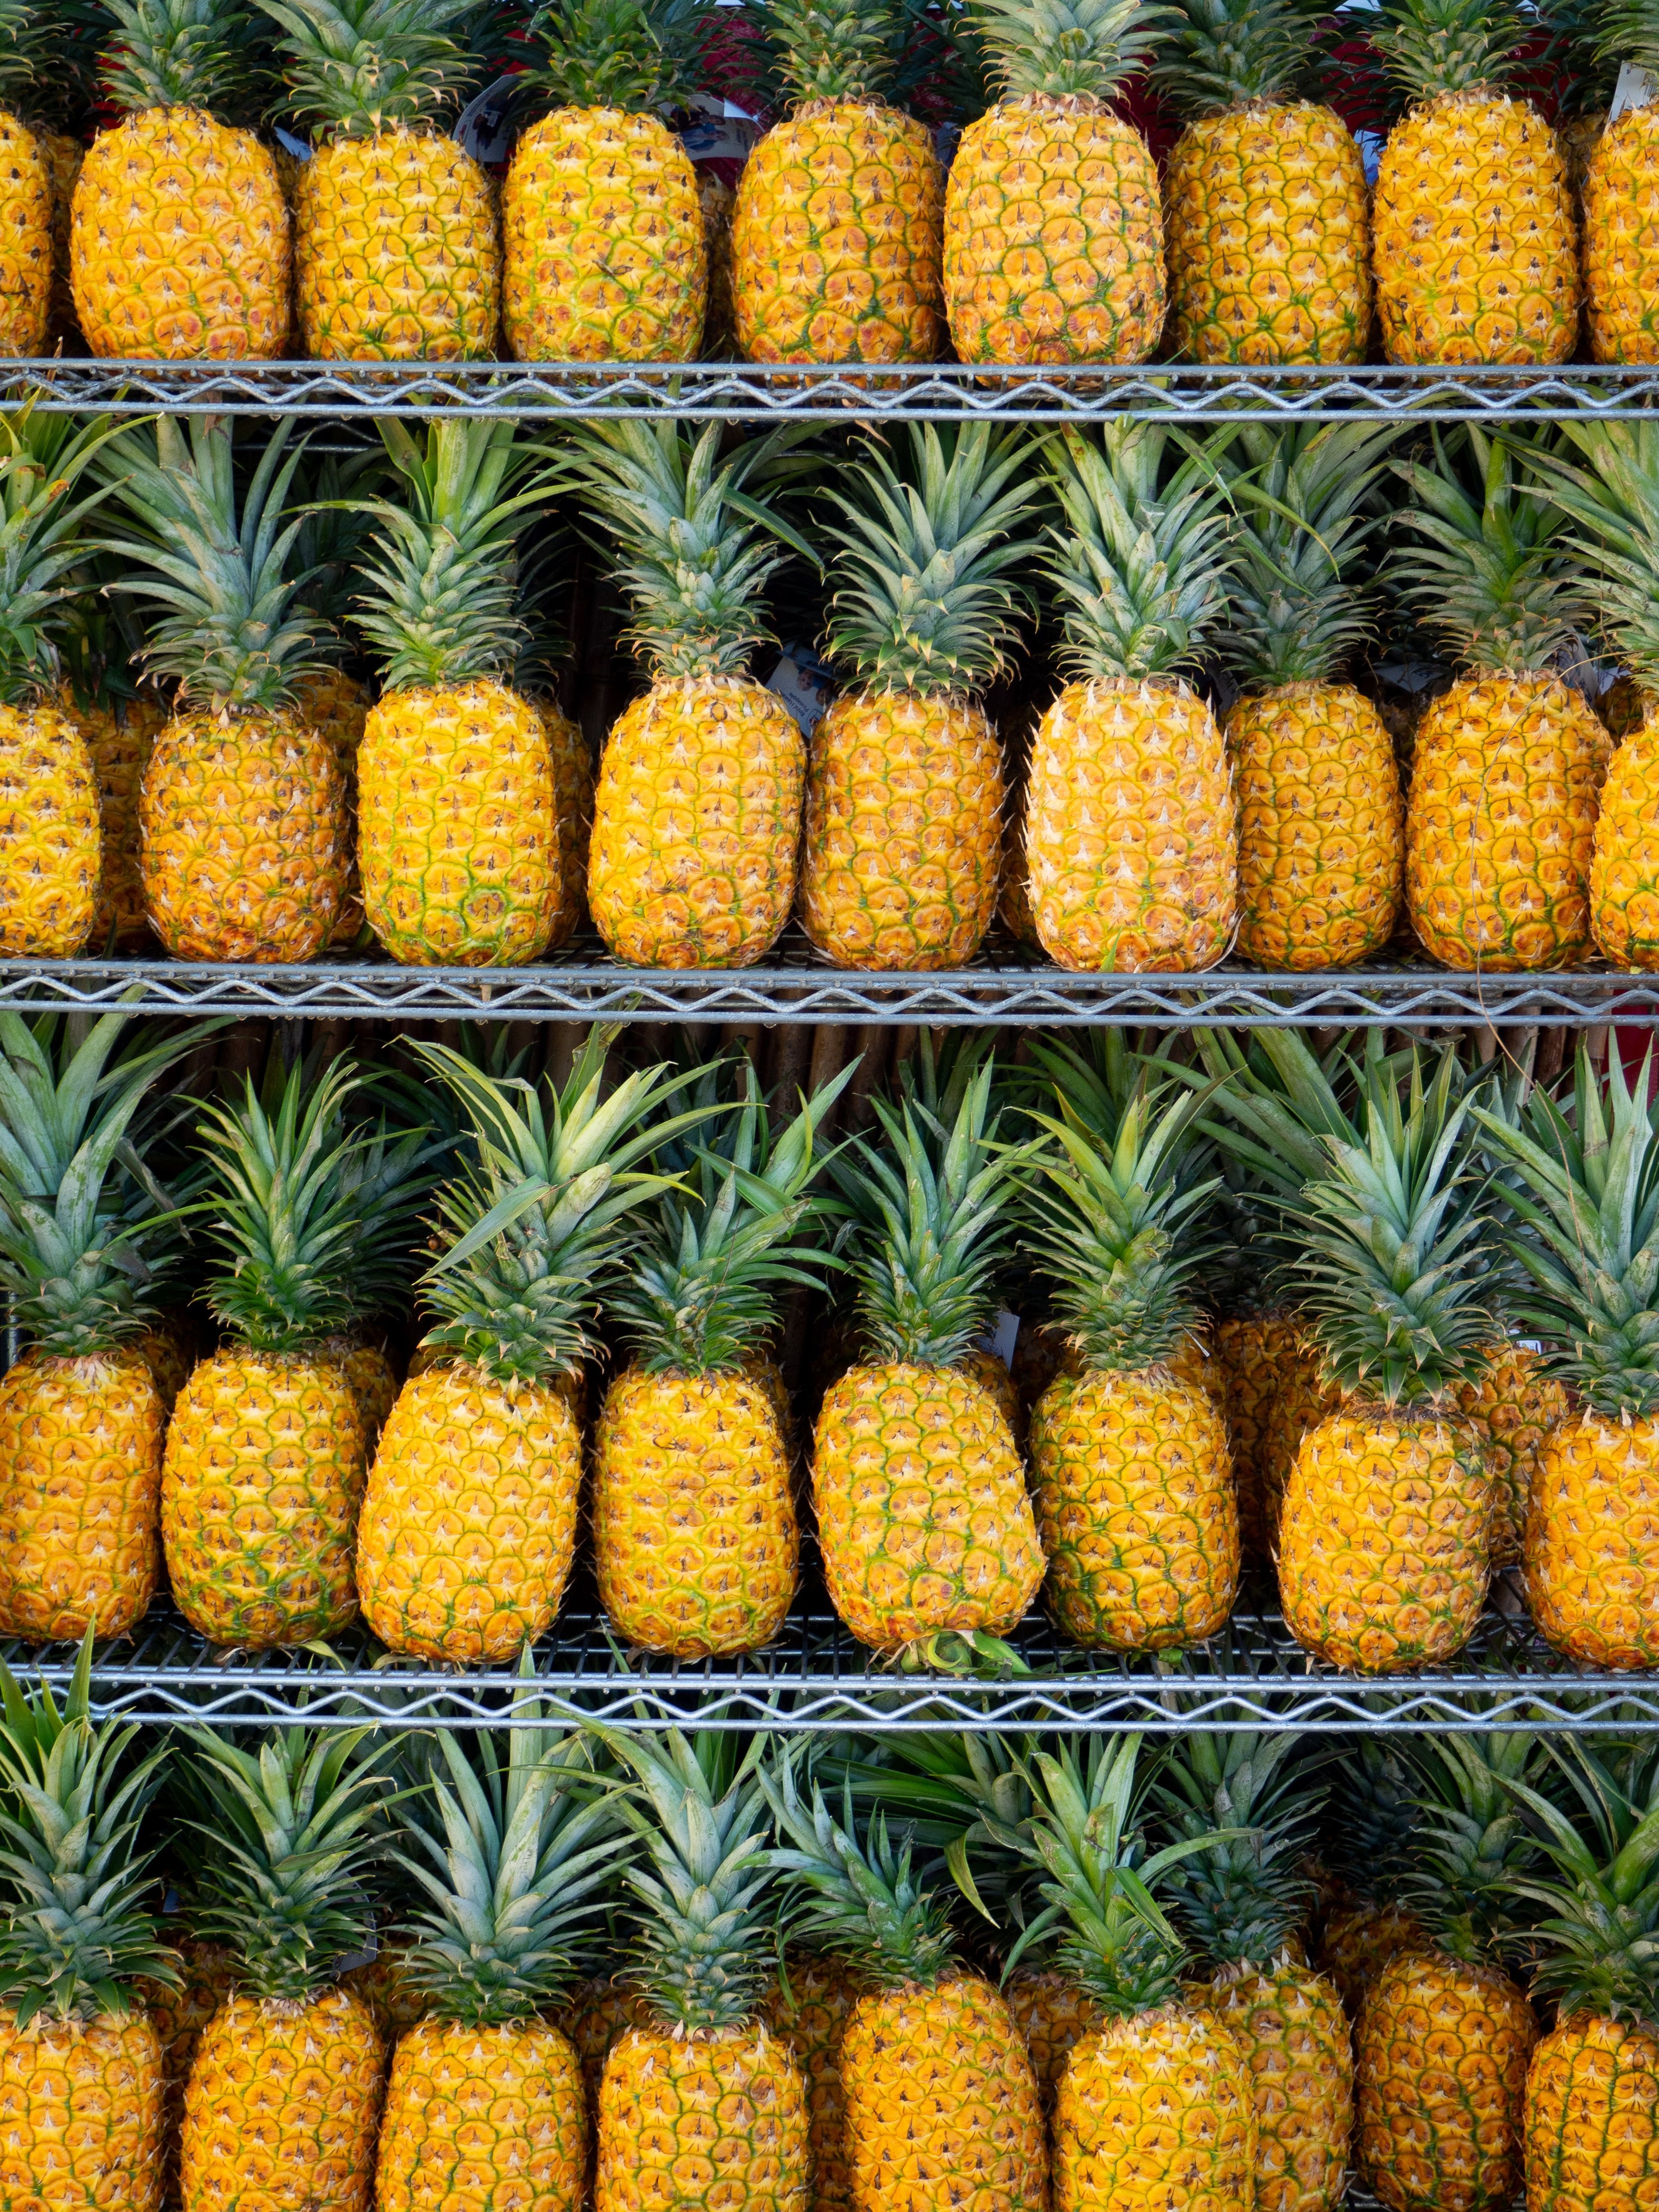 Pineapples on display at a Farmers Market in Hawaii